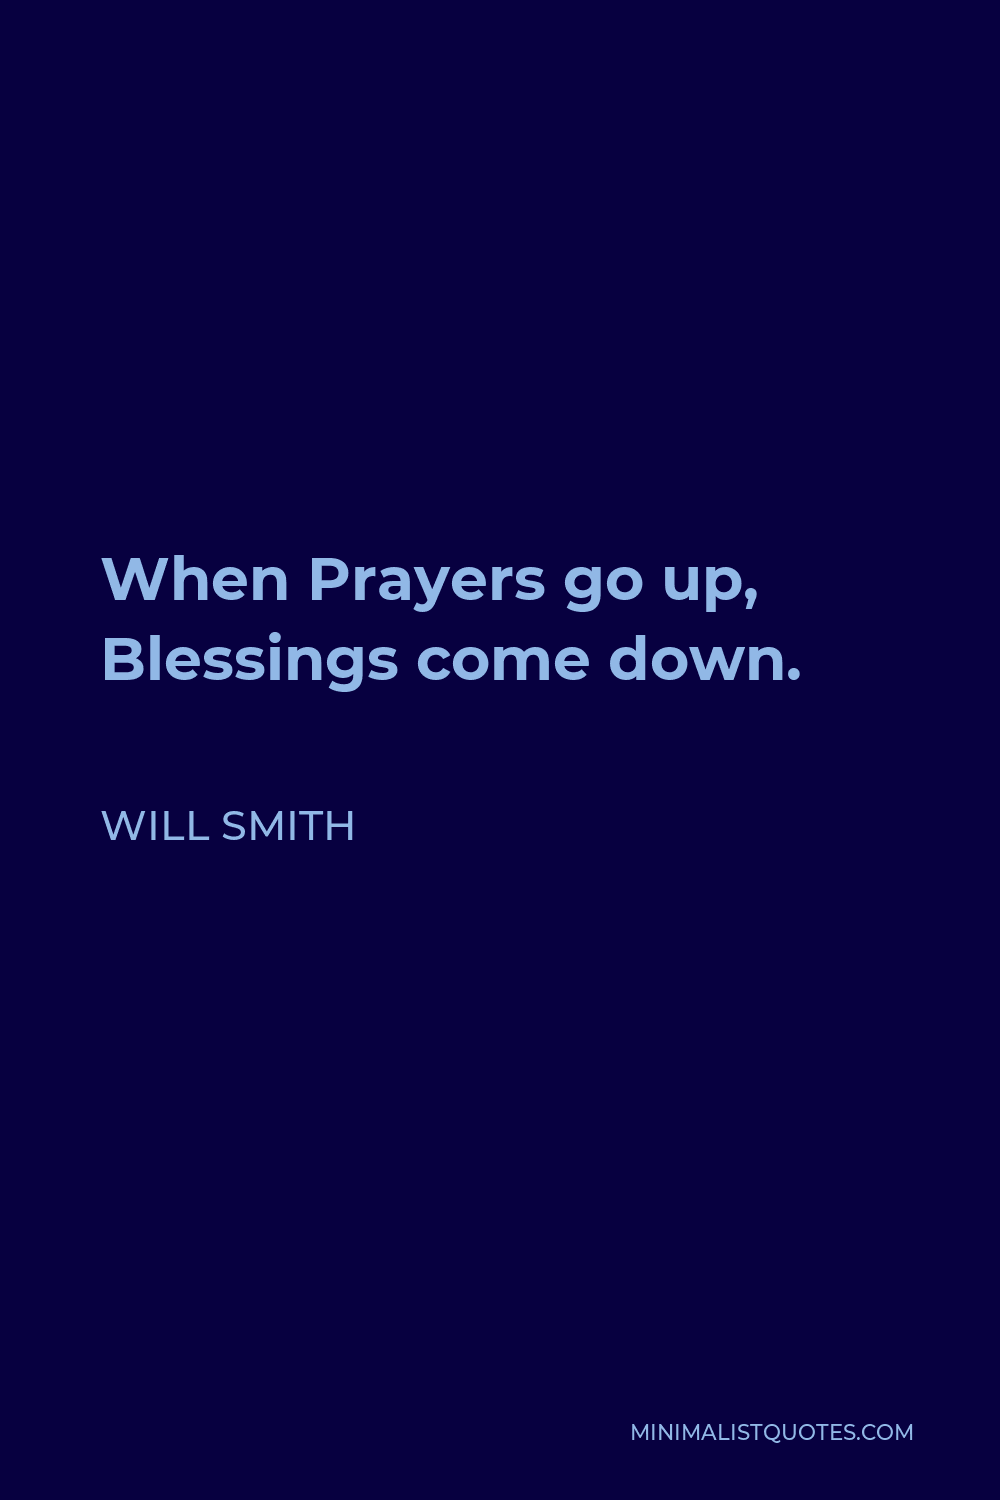 Will Smith Quote - When Prayers go up, Blessings come down.